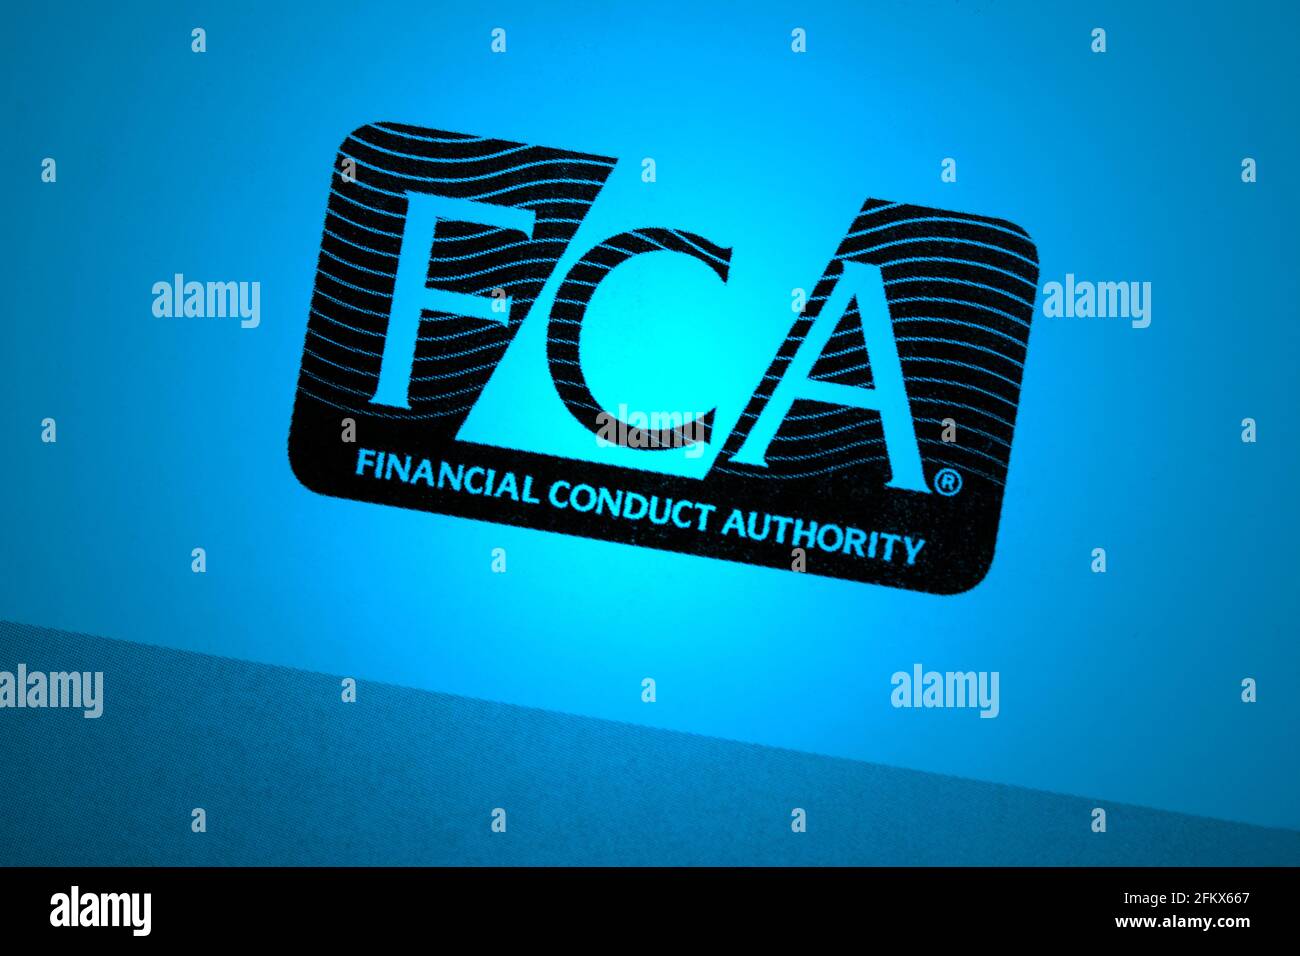 FCA, Financial Conduct Authority, logo Banque D'Images